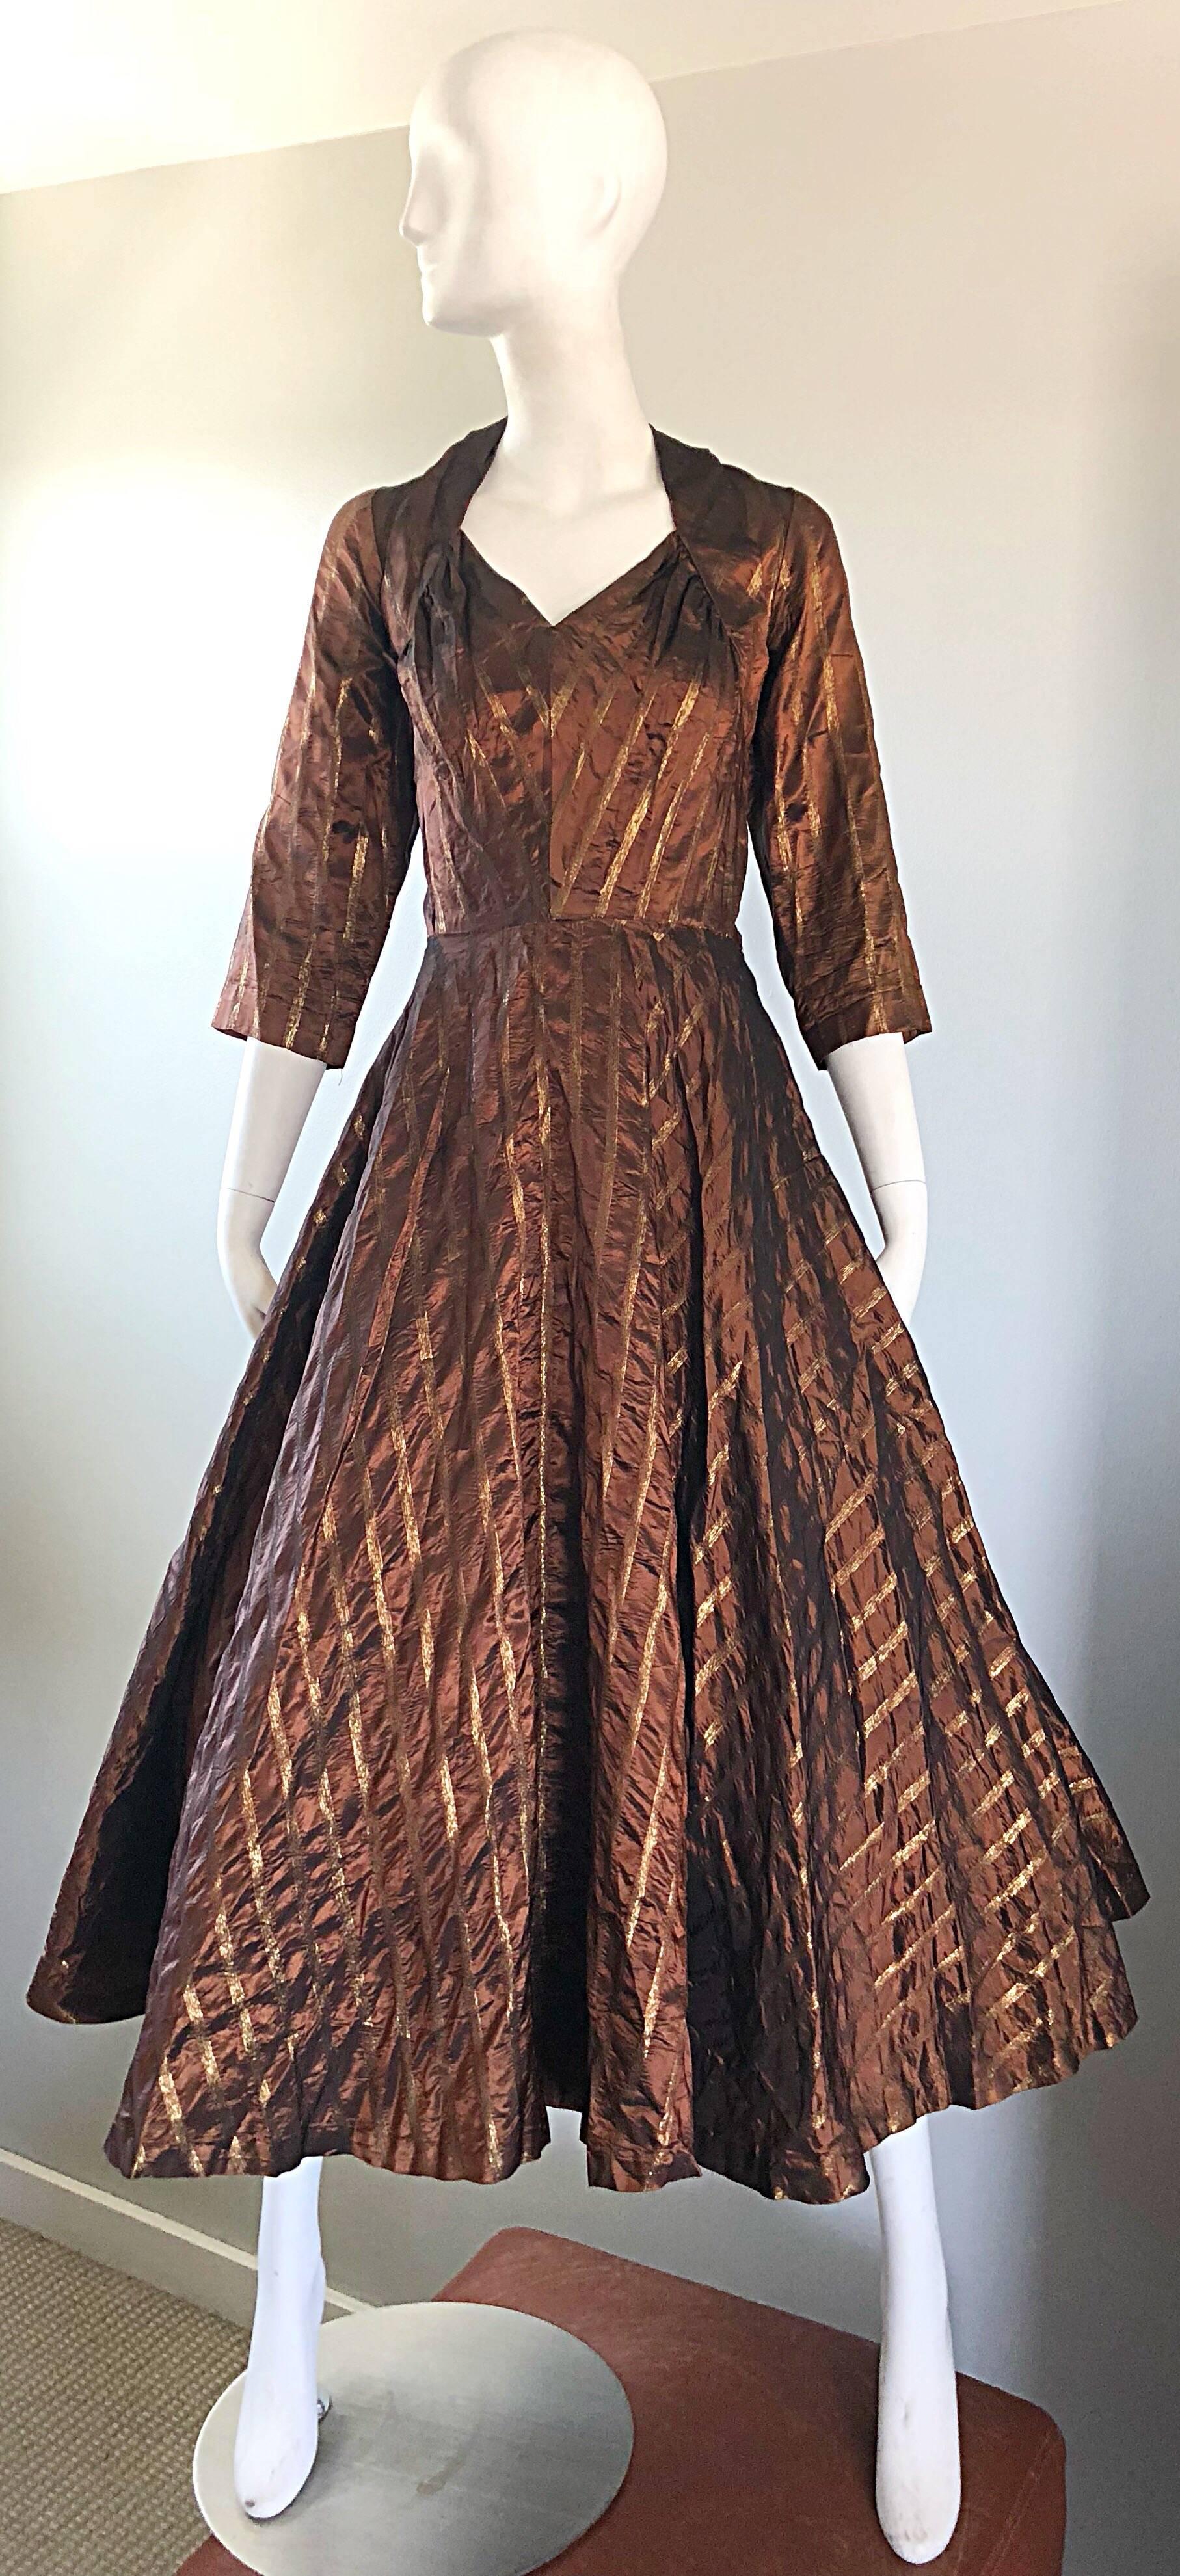 Gorgeous 50s DONALD ORIGINALS copper / bronze metallic silk fit n' flare cocktail dress! Features flattering golden bronze stripes throughout. Puckered neckline has so much detail. Tailored fitted bodice with a forgiving full skirt that could